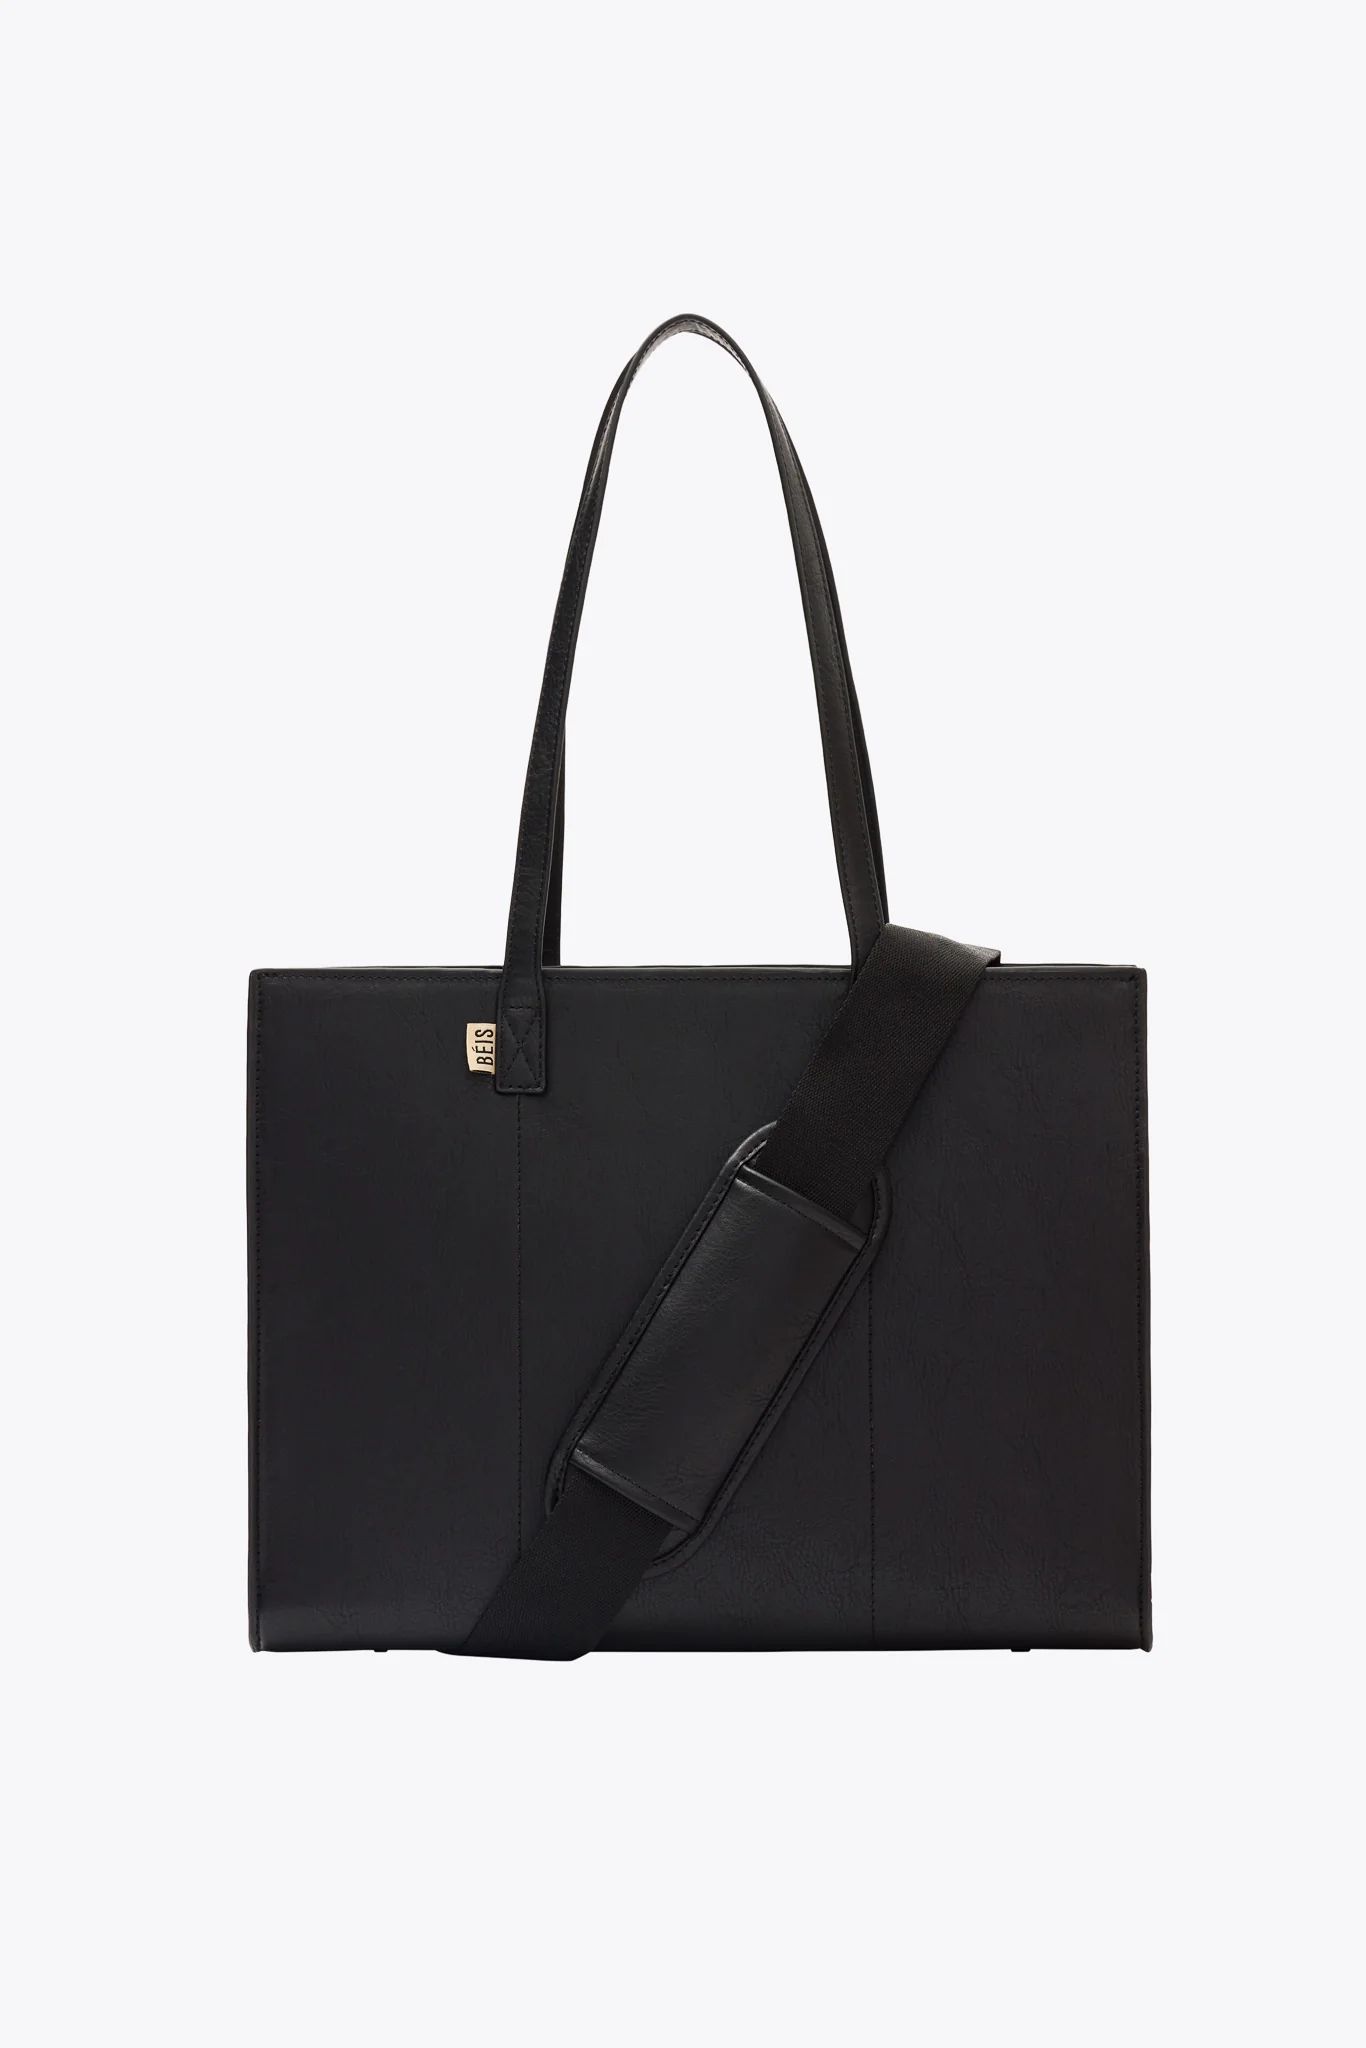 THE WORK TOTE IN BLACK | BÉIS Travel